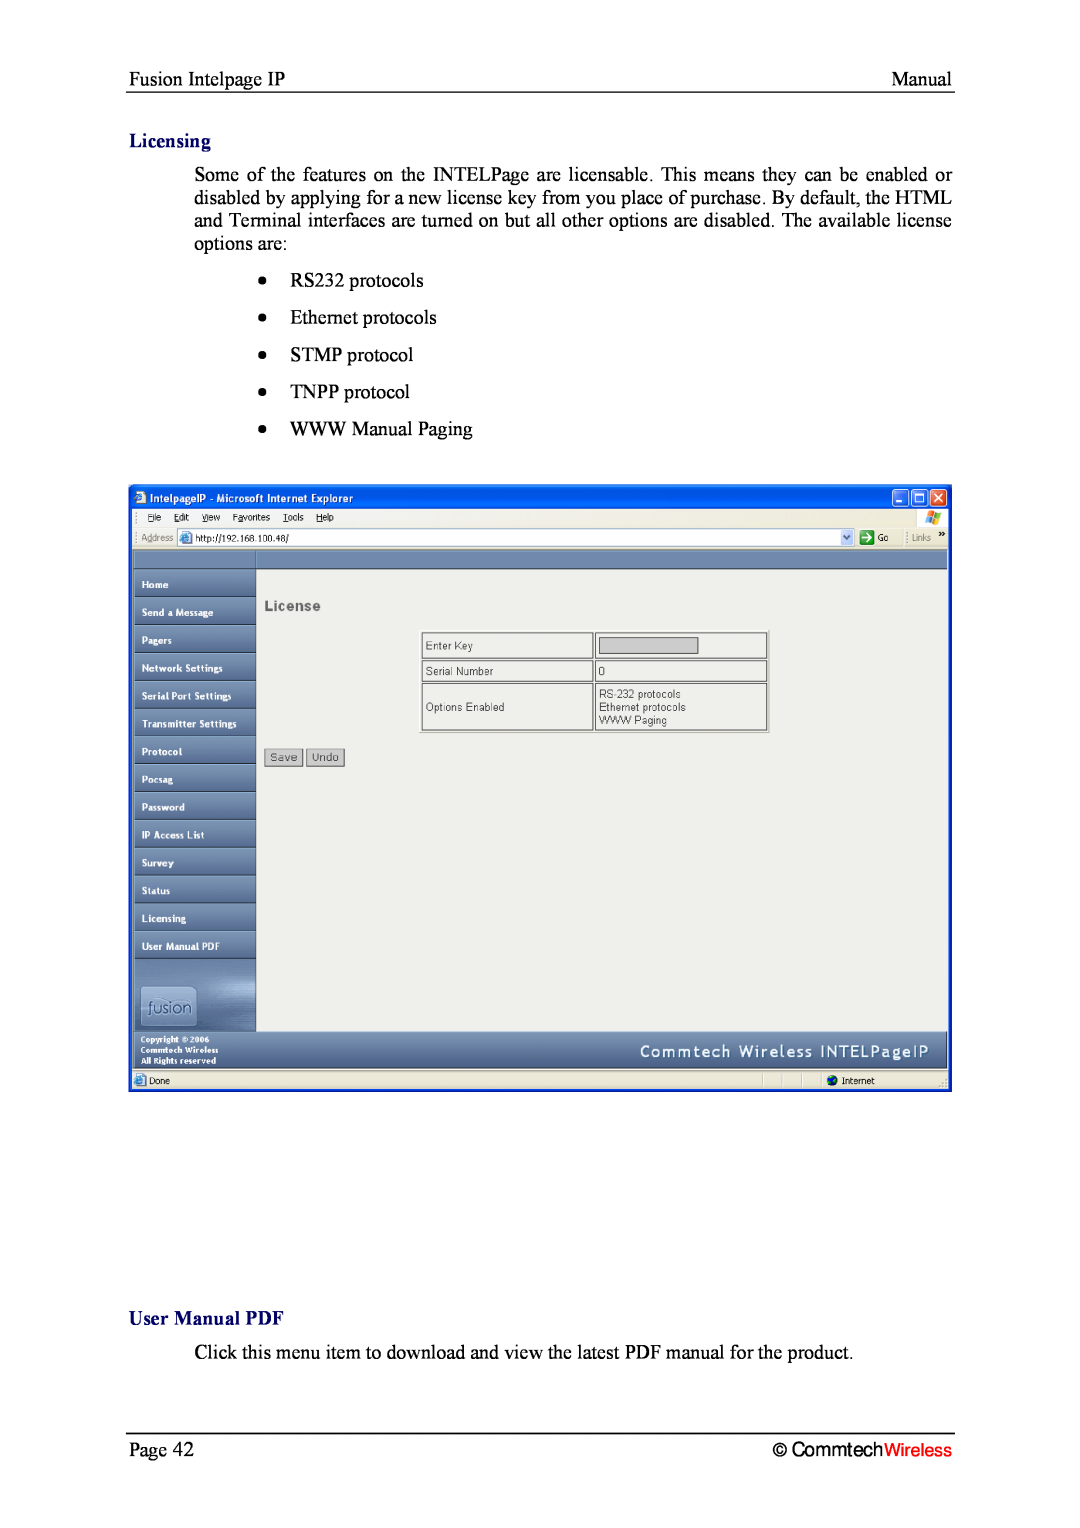 Fusion 2.1, INTELPage IP 5 manual Licensing, CommtechWireless 